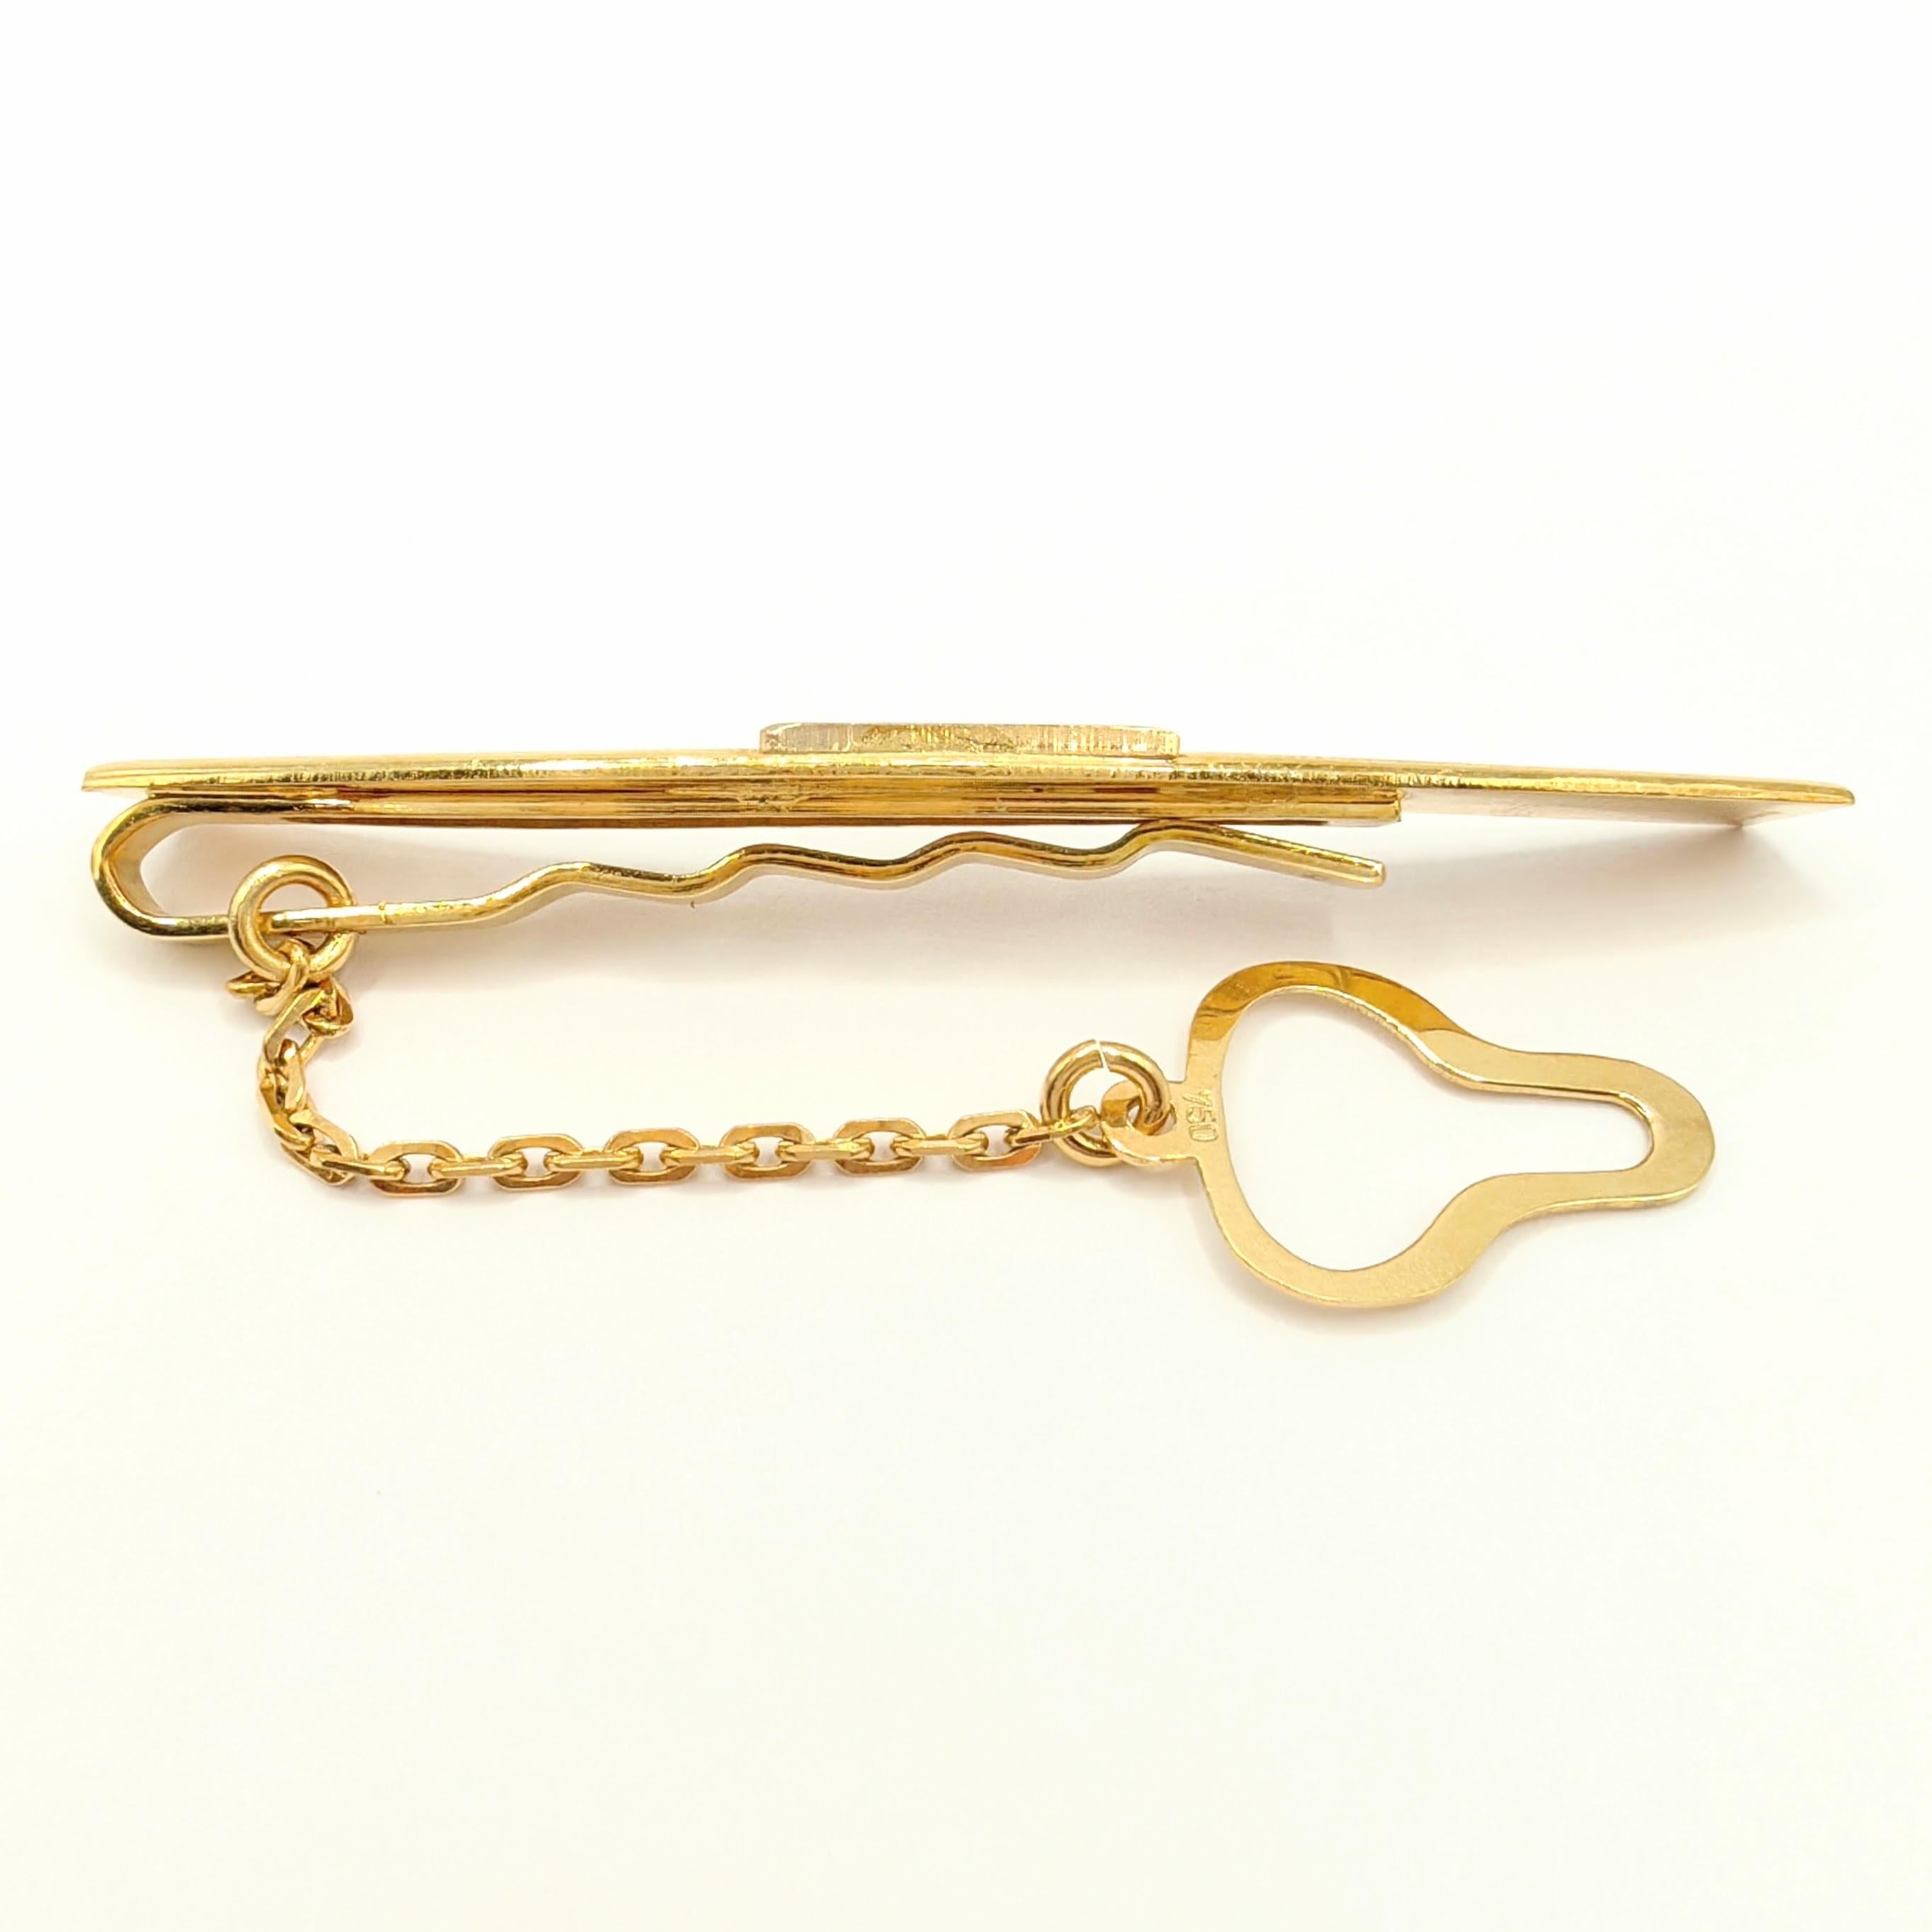 Men's Vintage Fan Shape Tie Clip With Chain in 18K Yellow & White Two-tone Gold For Sale